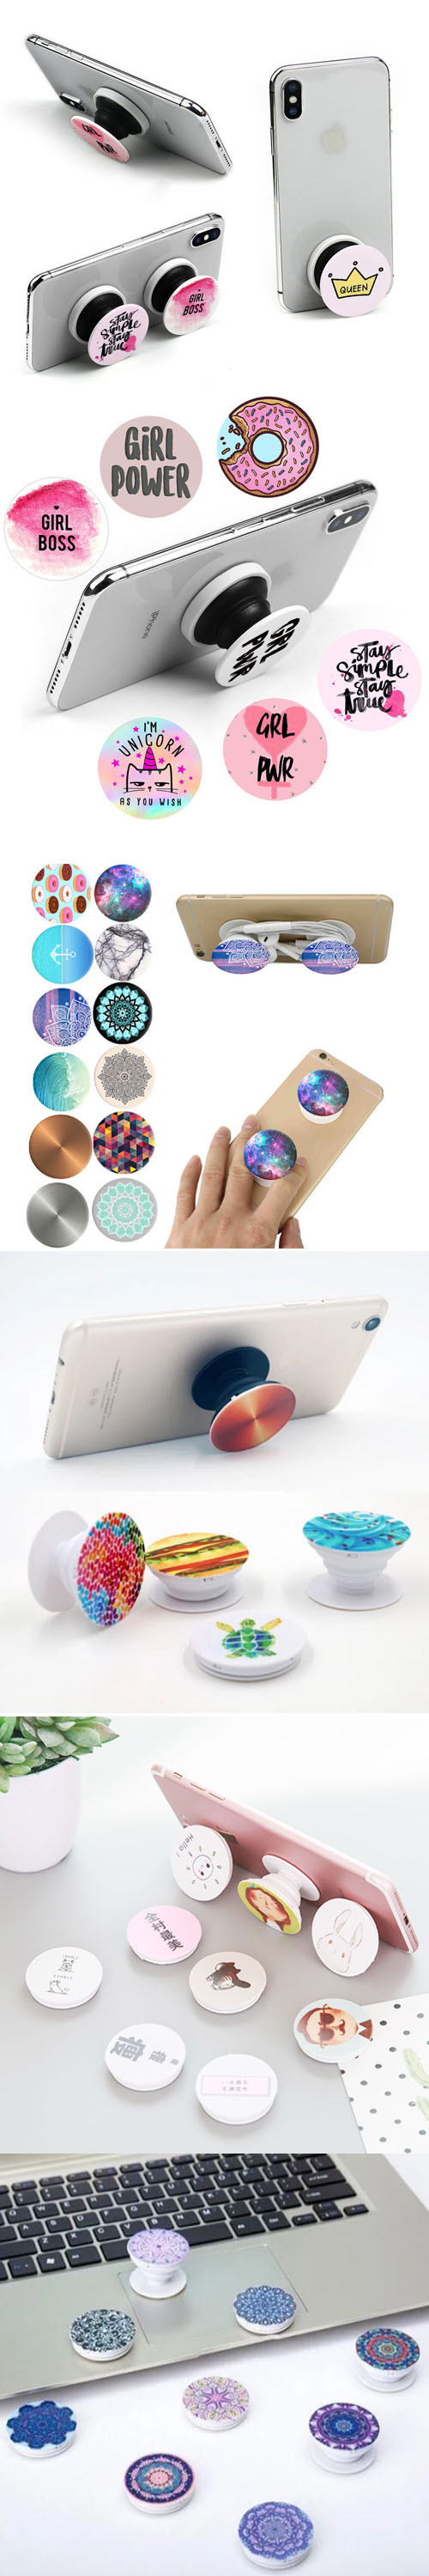 Promotion Gift Pop Socket Phone Stand